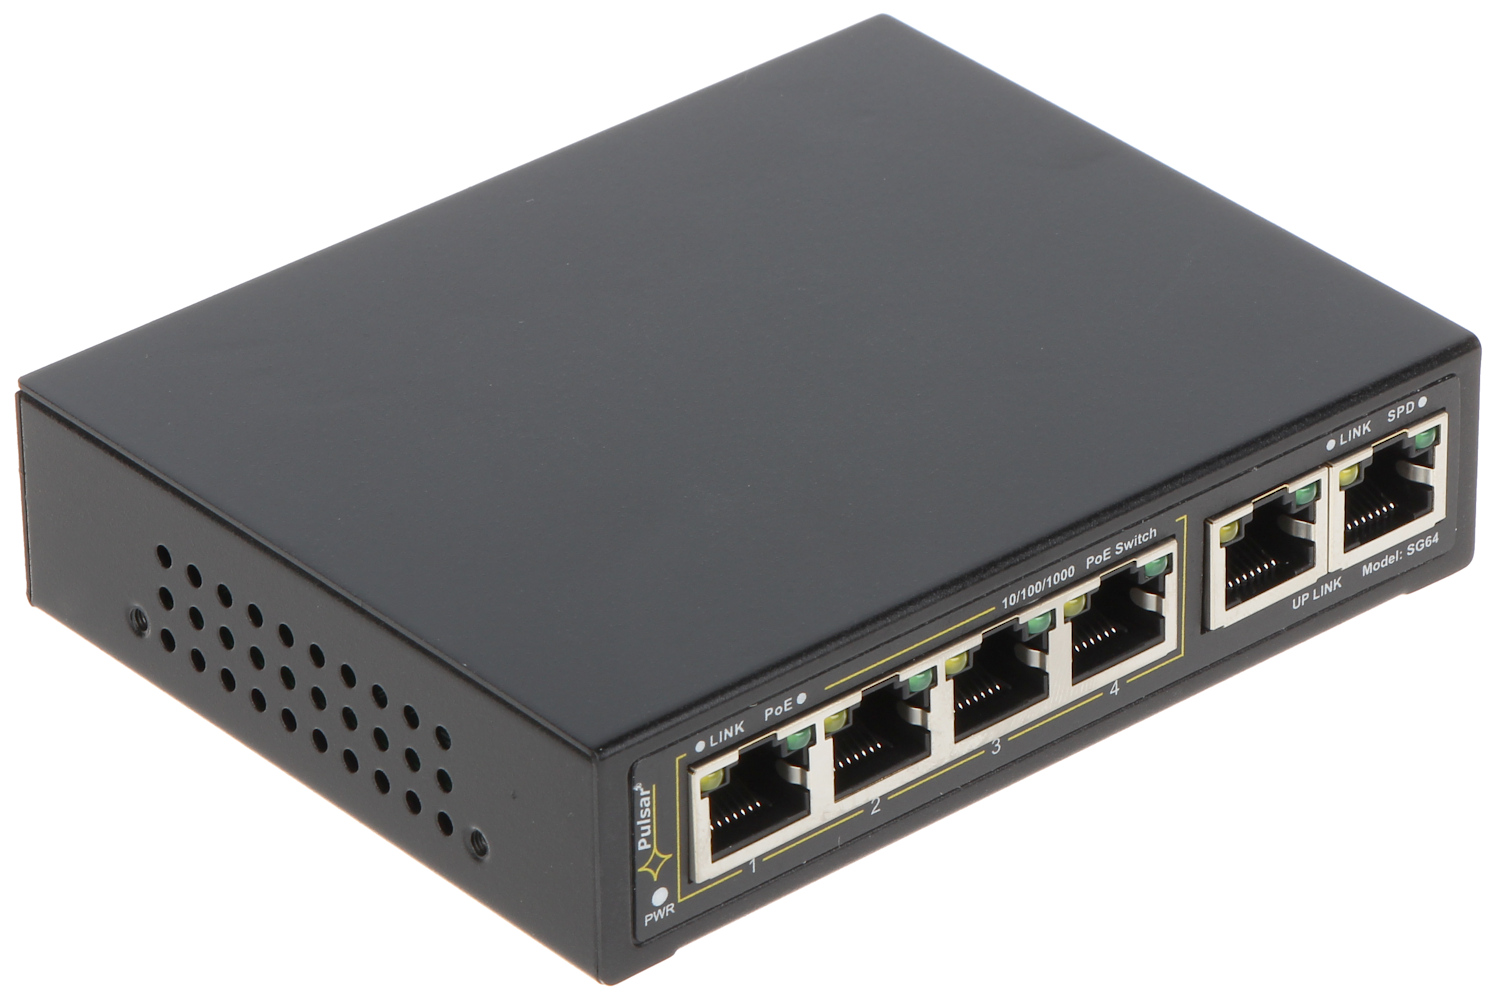 SWITCH POE SG-64 4-PORT PULSAR - PoE Switches with 8 Ports support - Delta